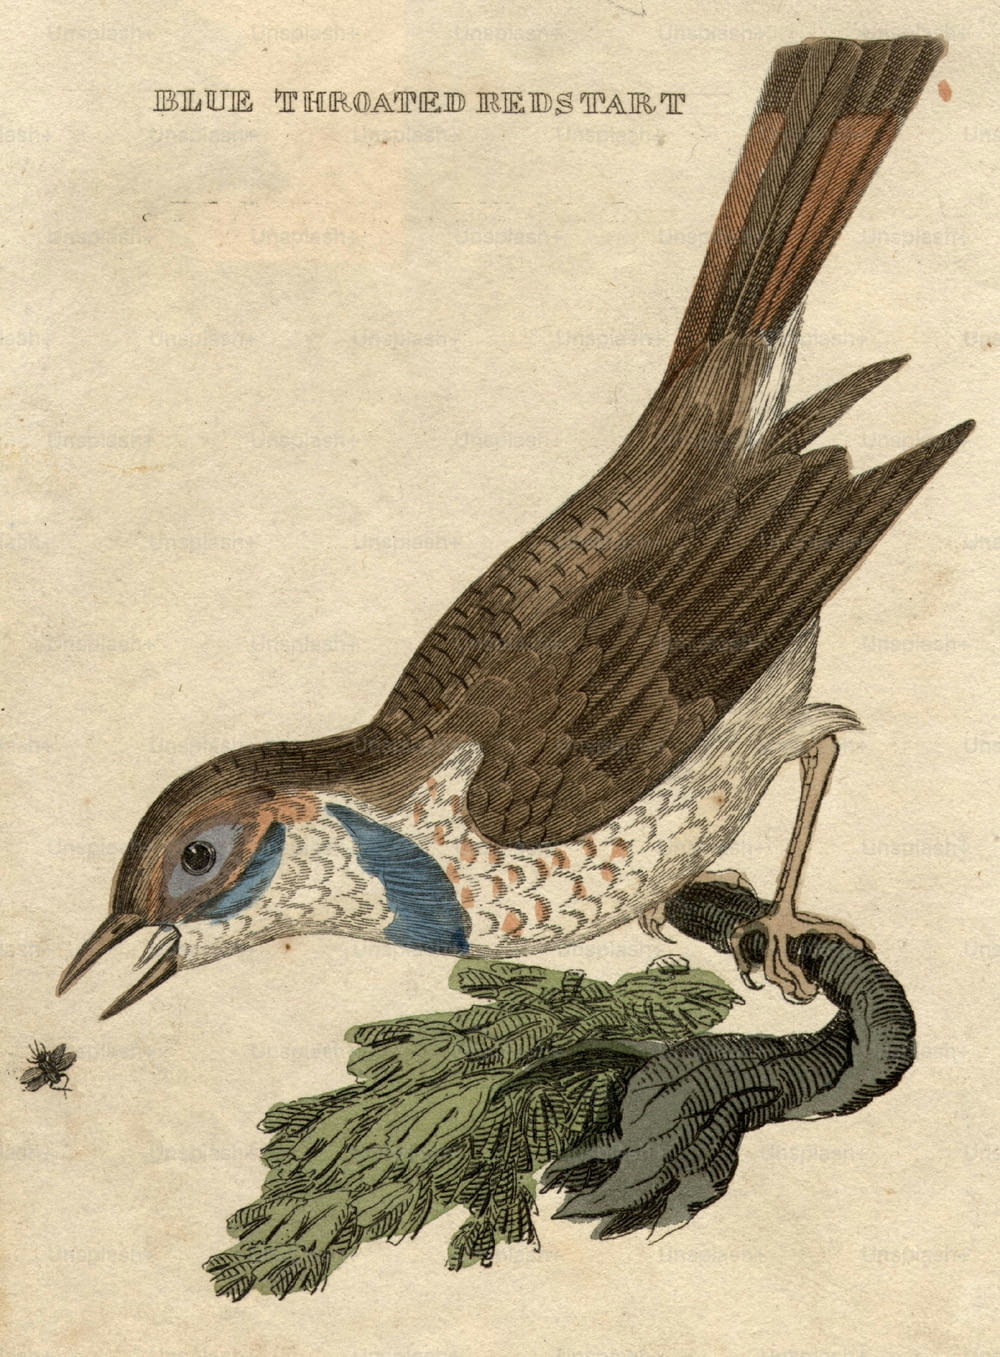 circa 1800:  The Blue-Throated Redstart catching a fly.  (Photo by Hulton Archive/Getty Images)